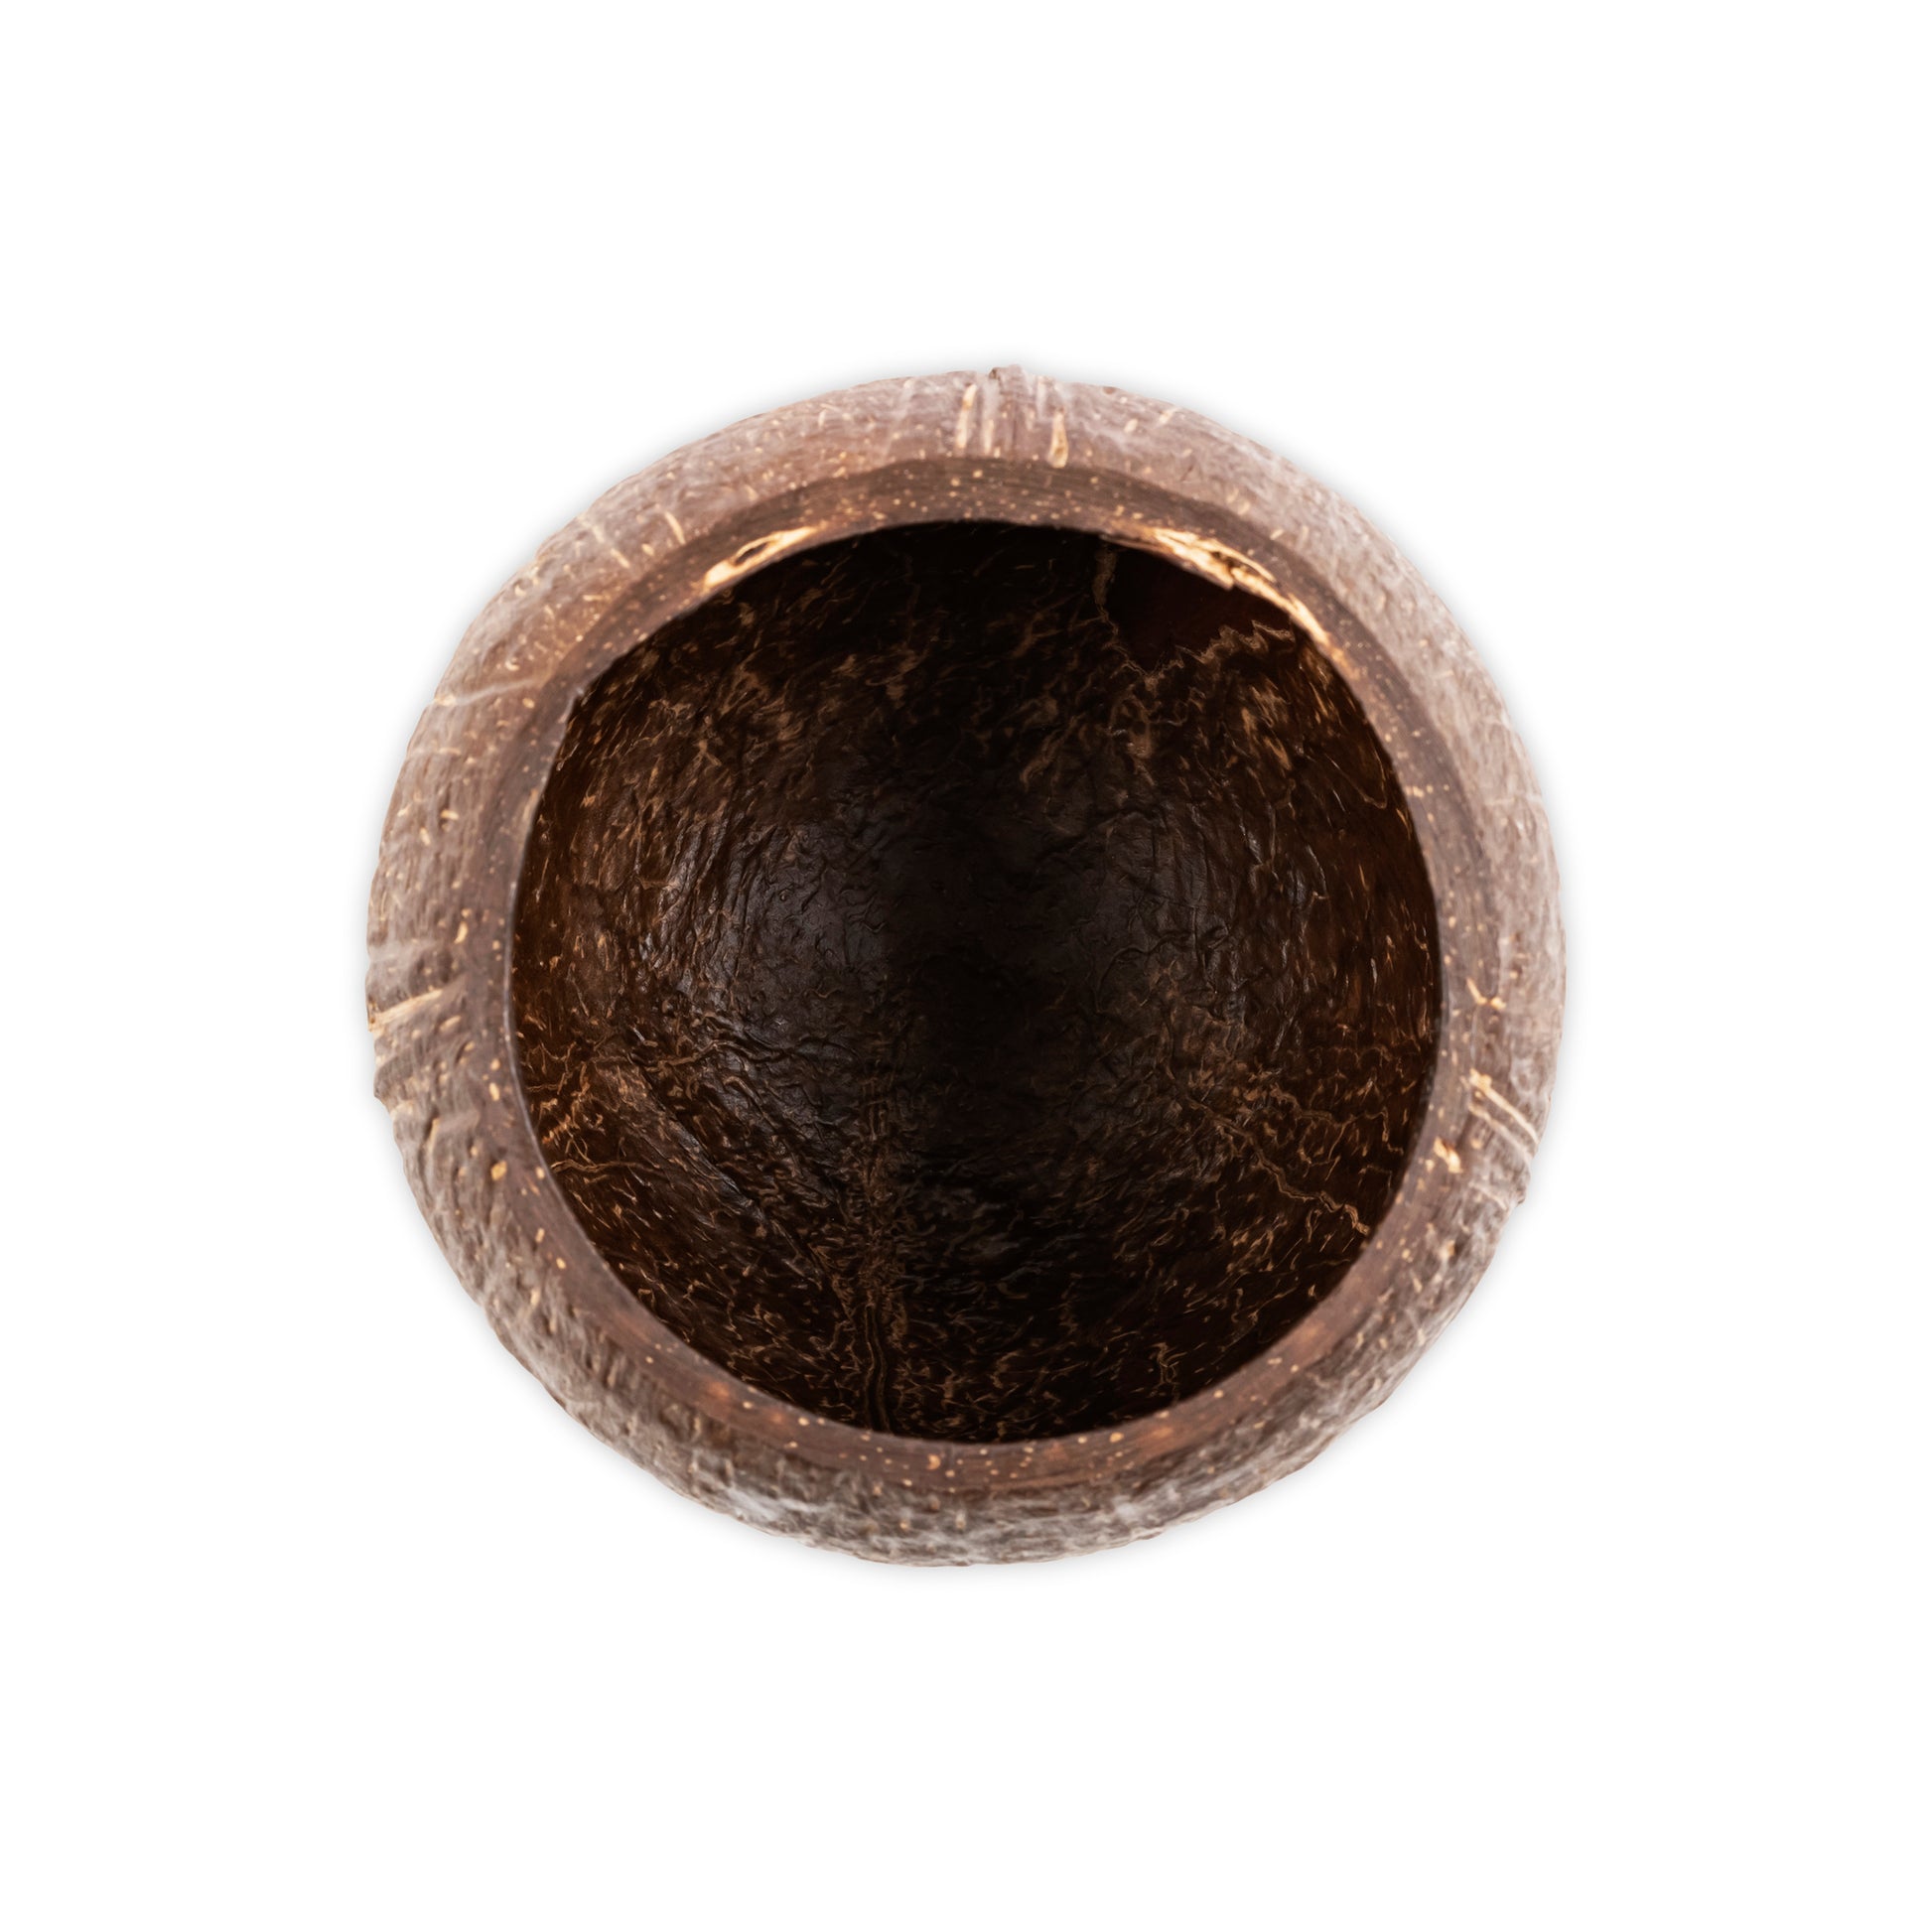 inside of coconut drinking cup